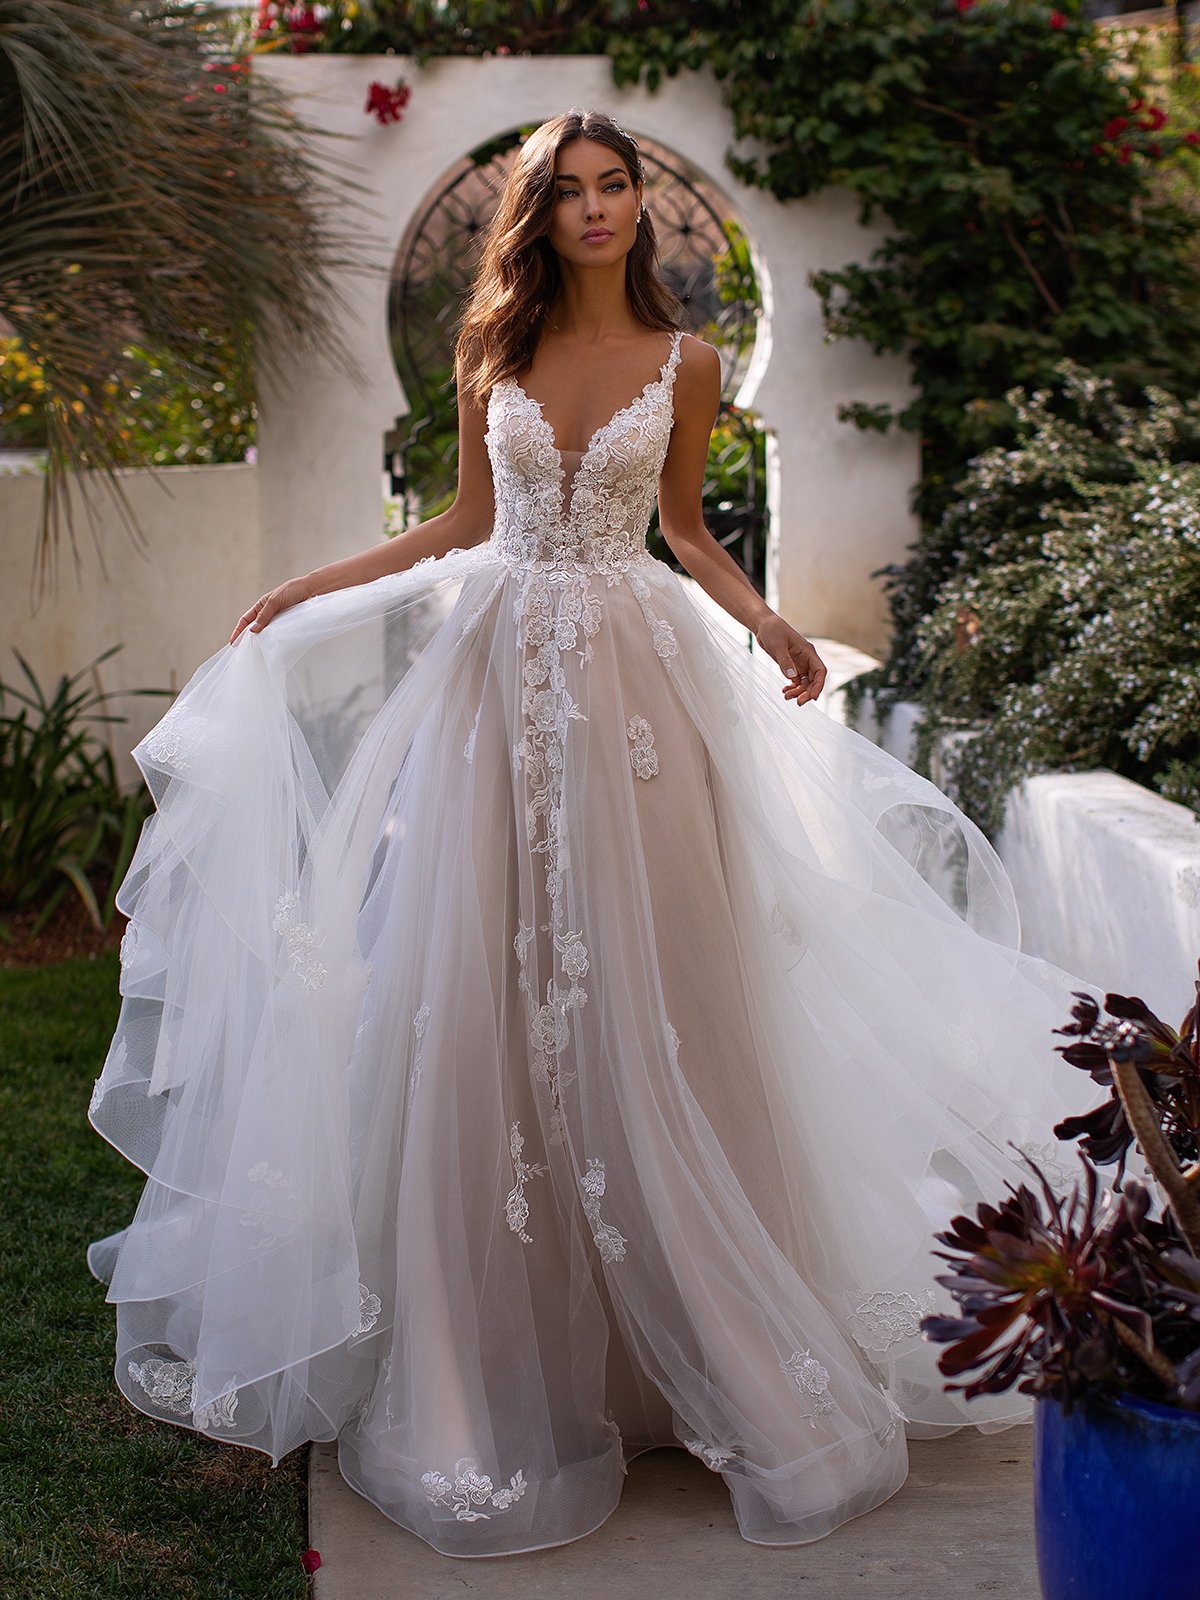 Lace Wedding Dress Styles & Trends in 2022 Moonlight Bridal